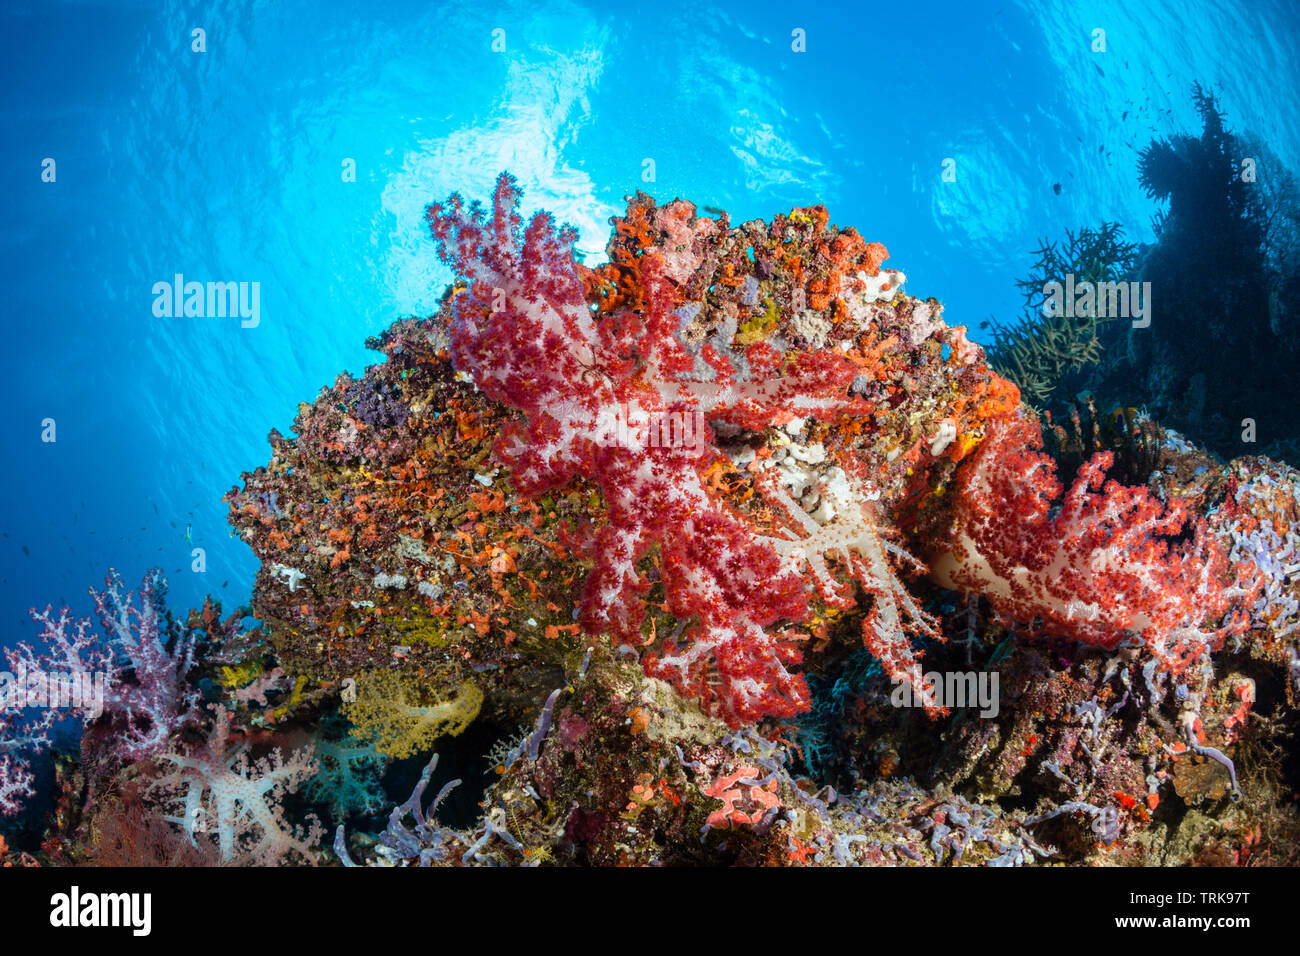 Soft Corals in Coral Reef, Dendronephthya, Lissenung, New Ireland, Papua New Guinea Stock Photo